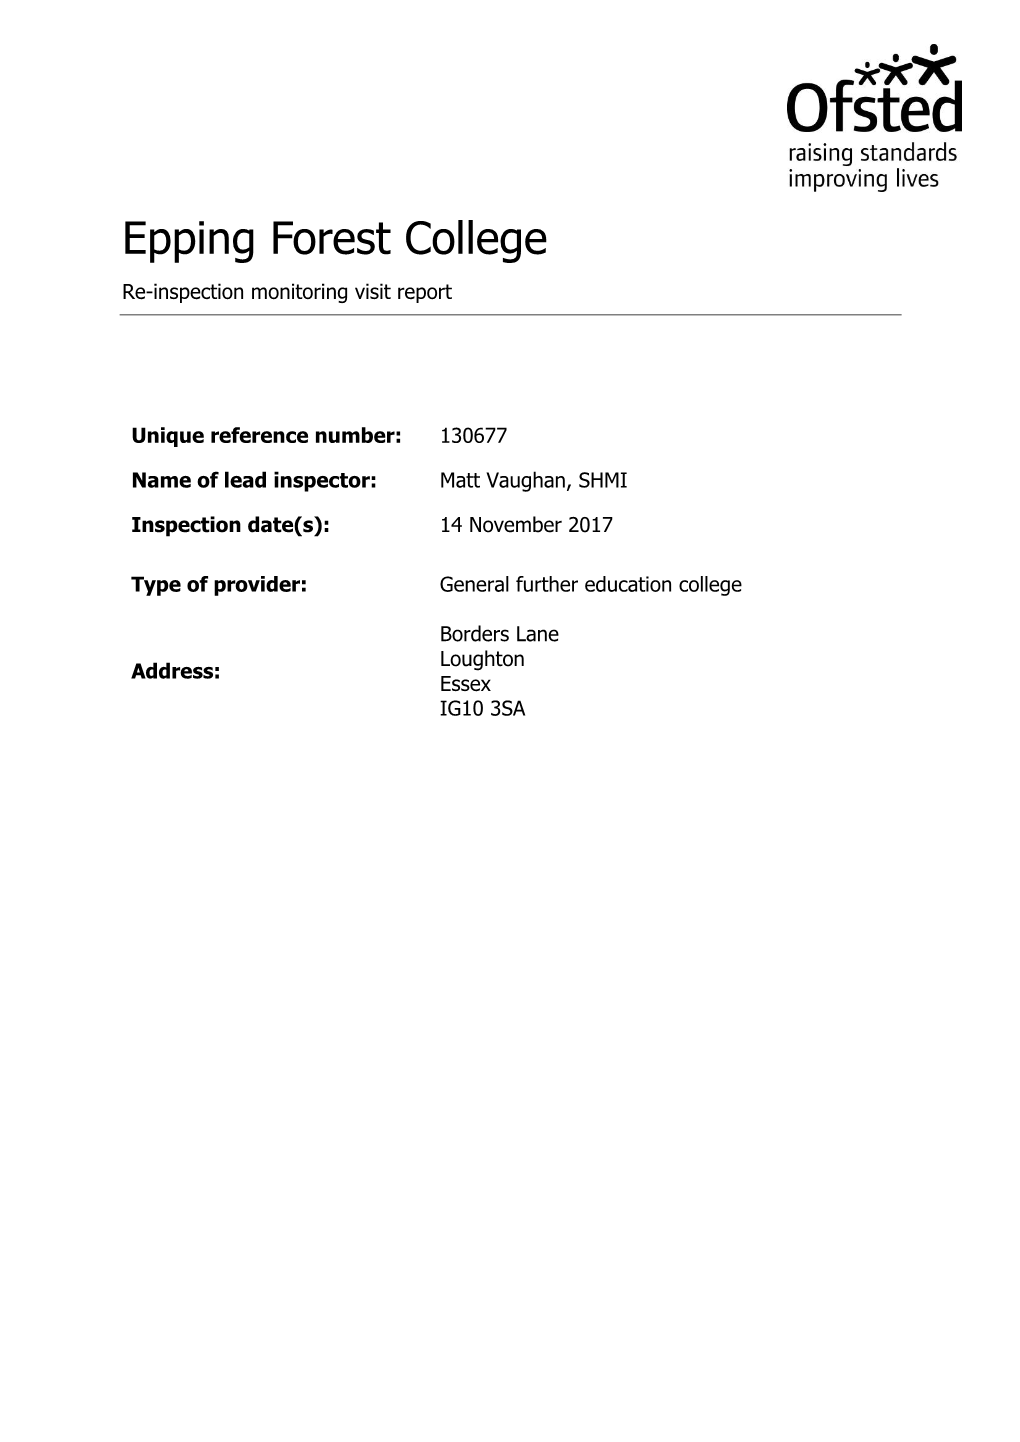 Epping Forest College Re-Inspection Monitoring Visit Report